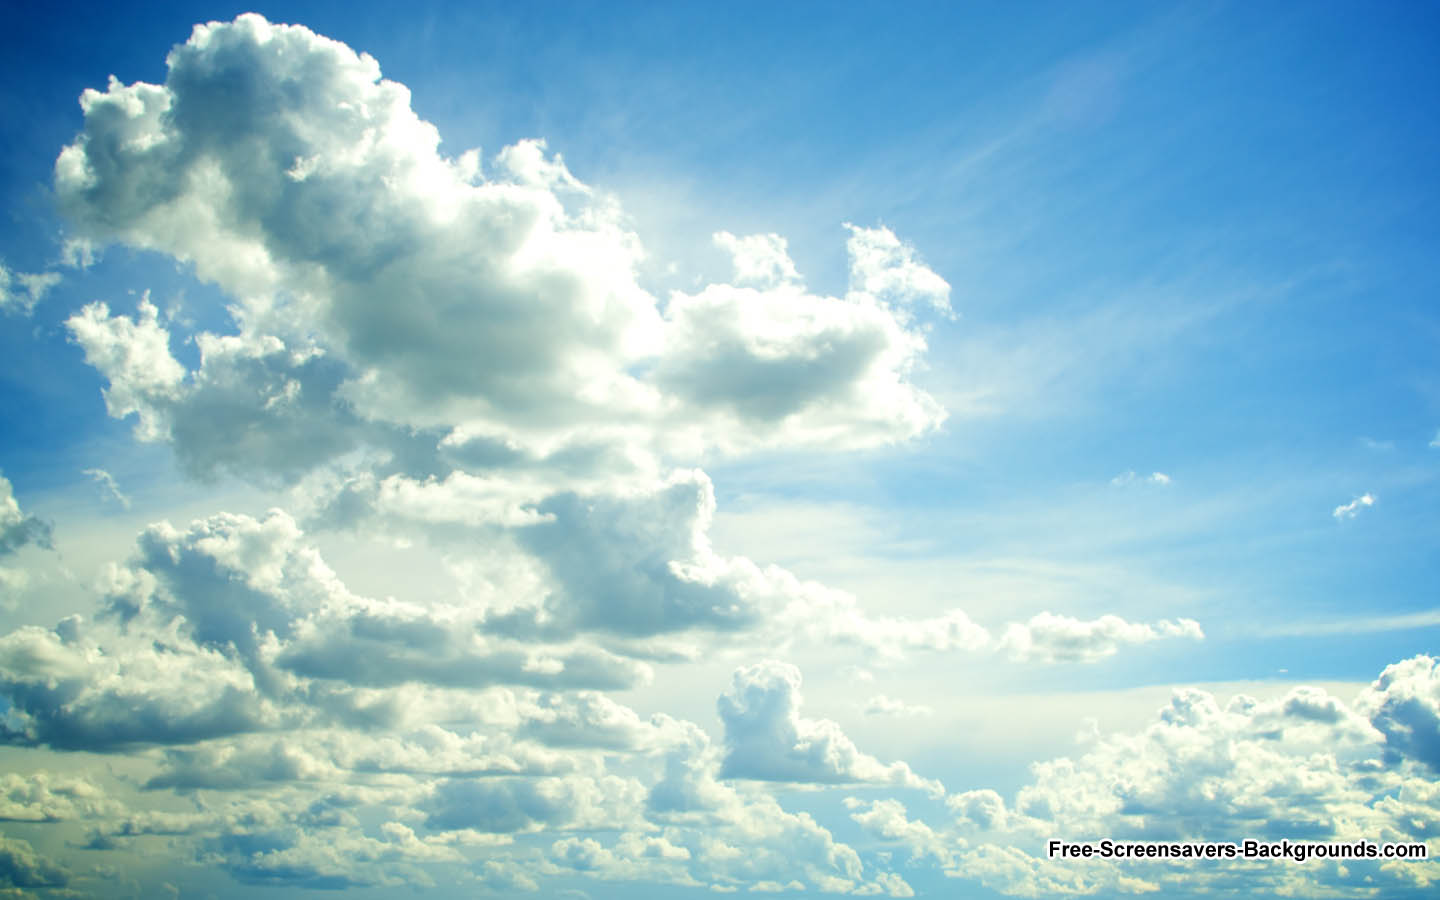 Clouds   Screensavers and Backgrounds 1440x900